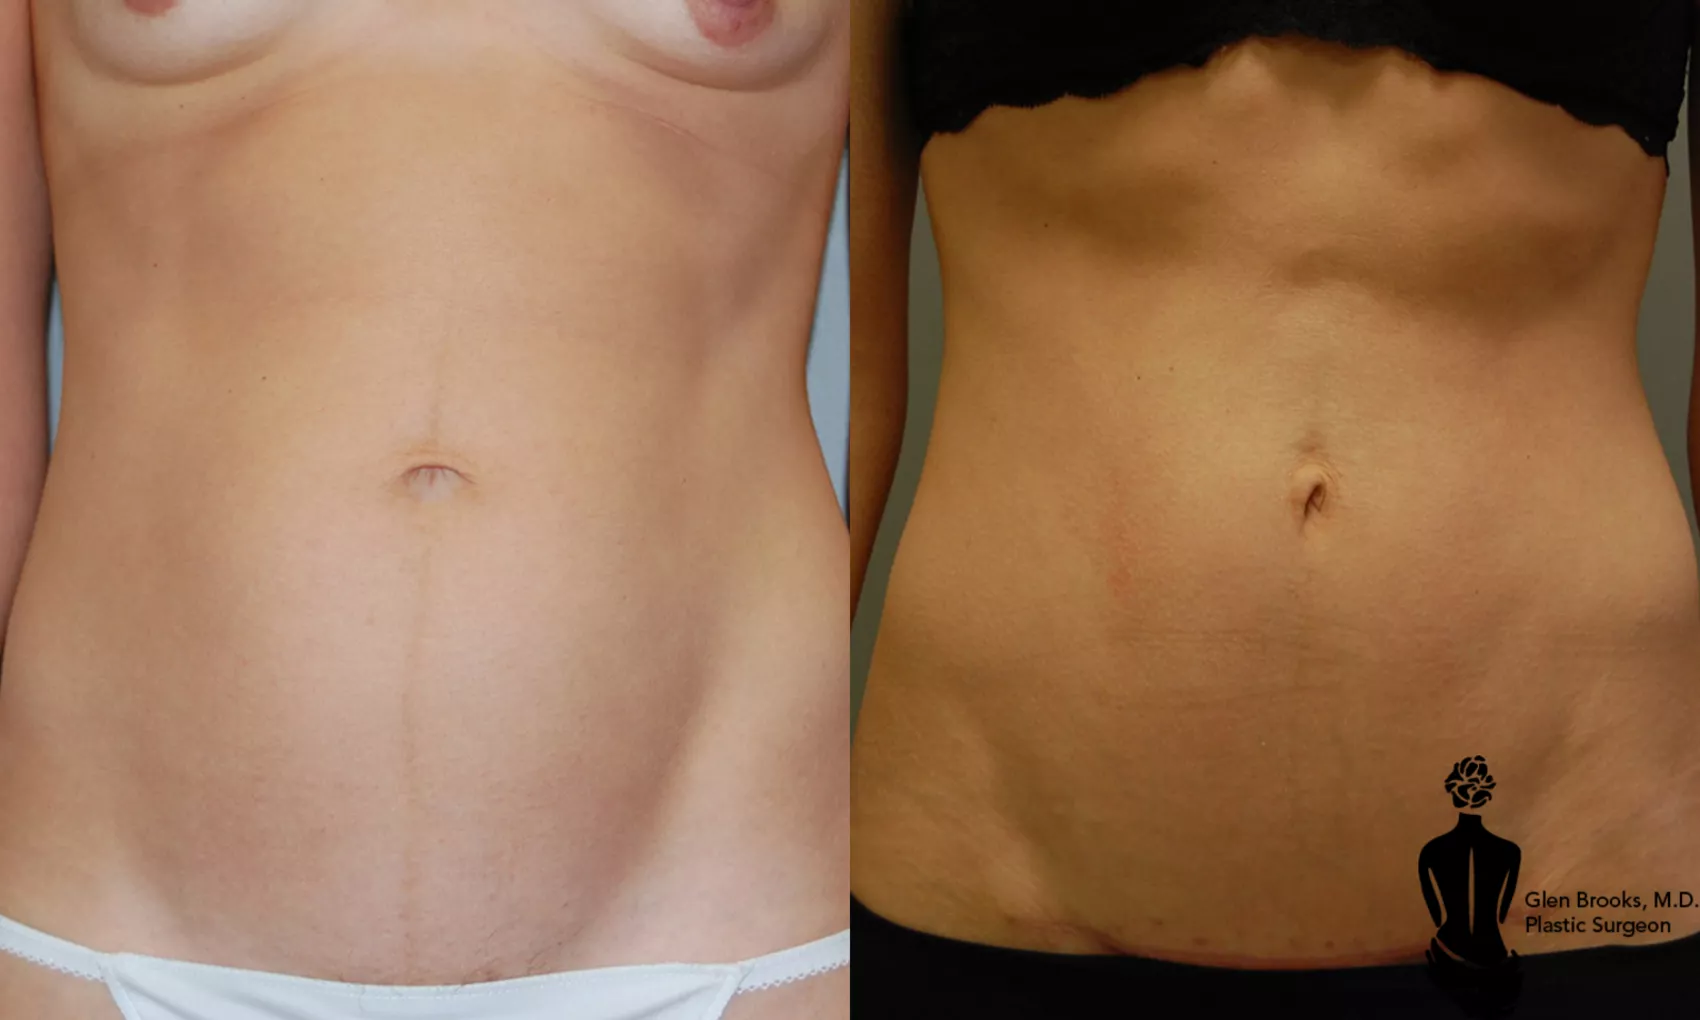 Mini Tummy Tuck Before & After Photos Patient 16, Springfield, MA